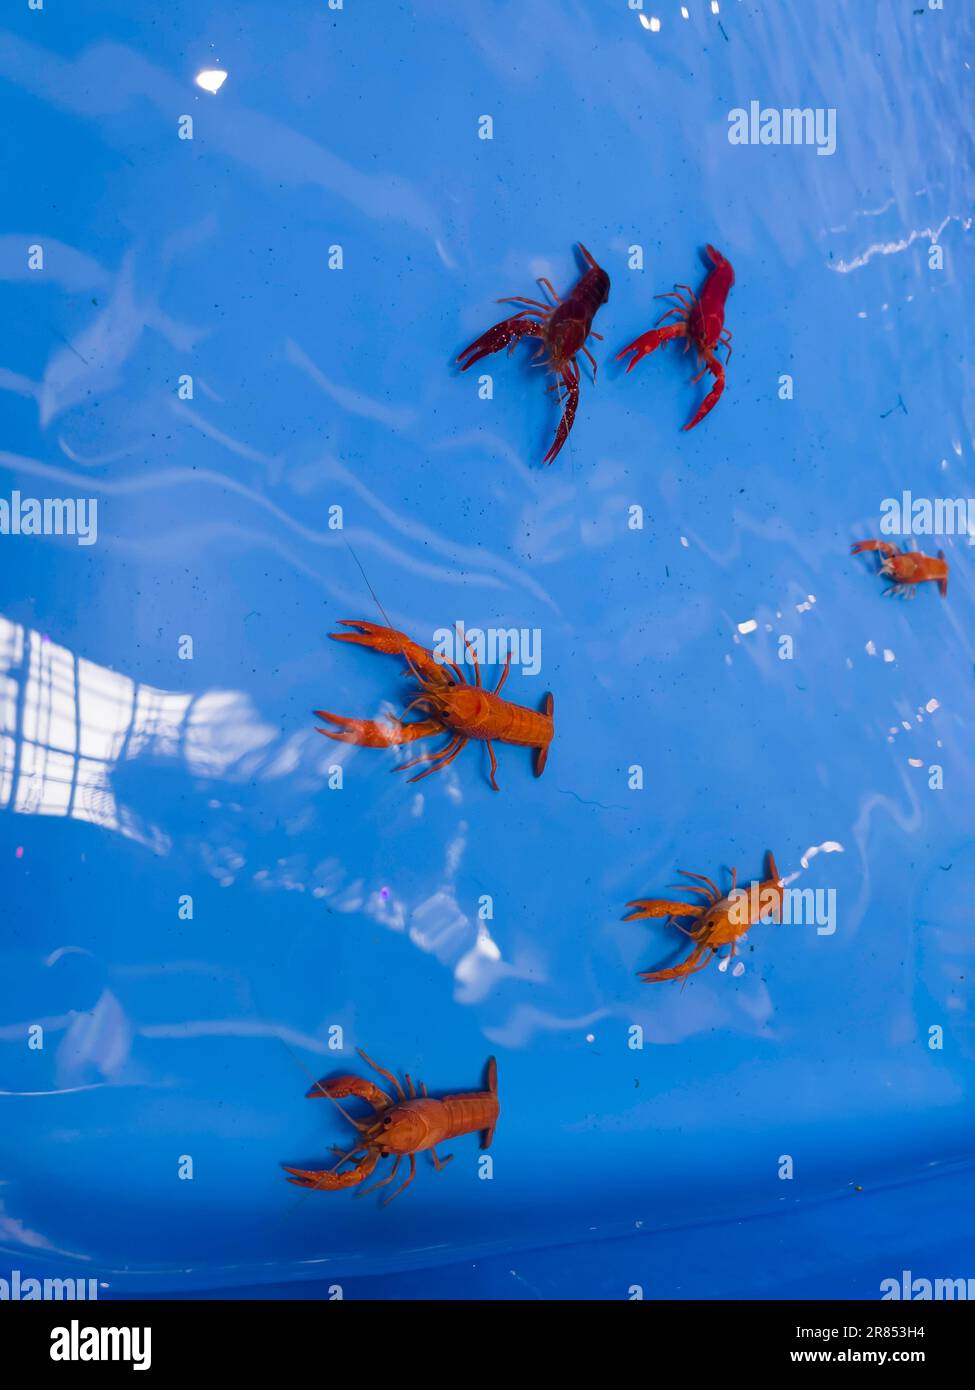 Cherry fire red dwarf shrimps stay on blue tank, stock photo Stock Photo